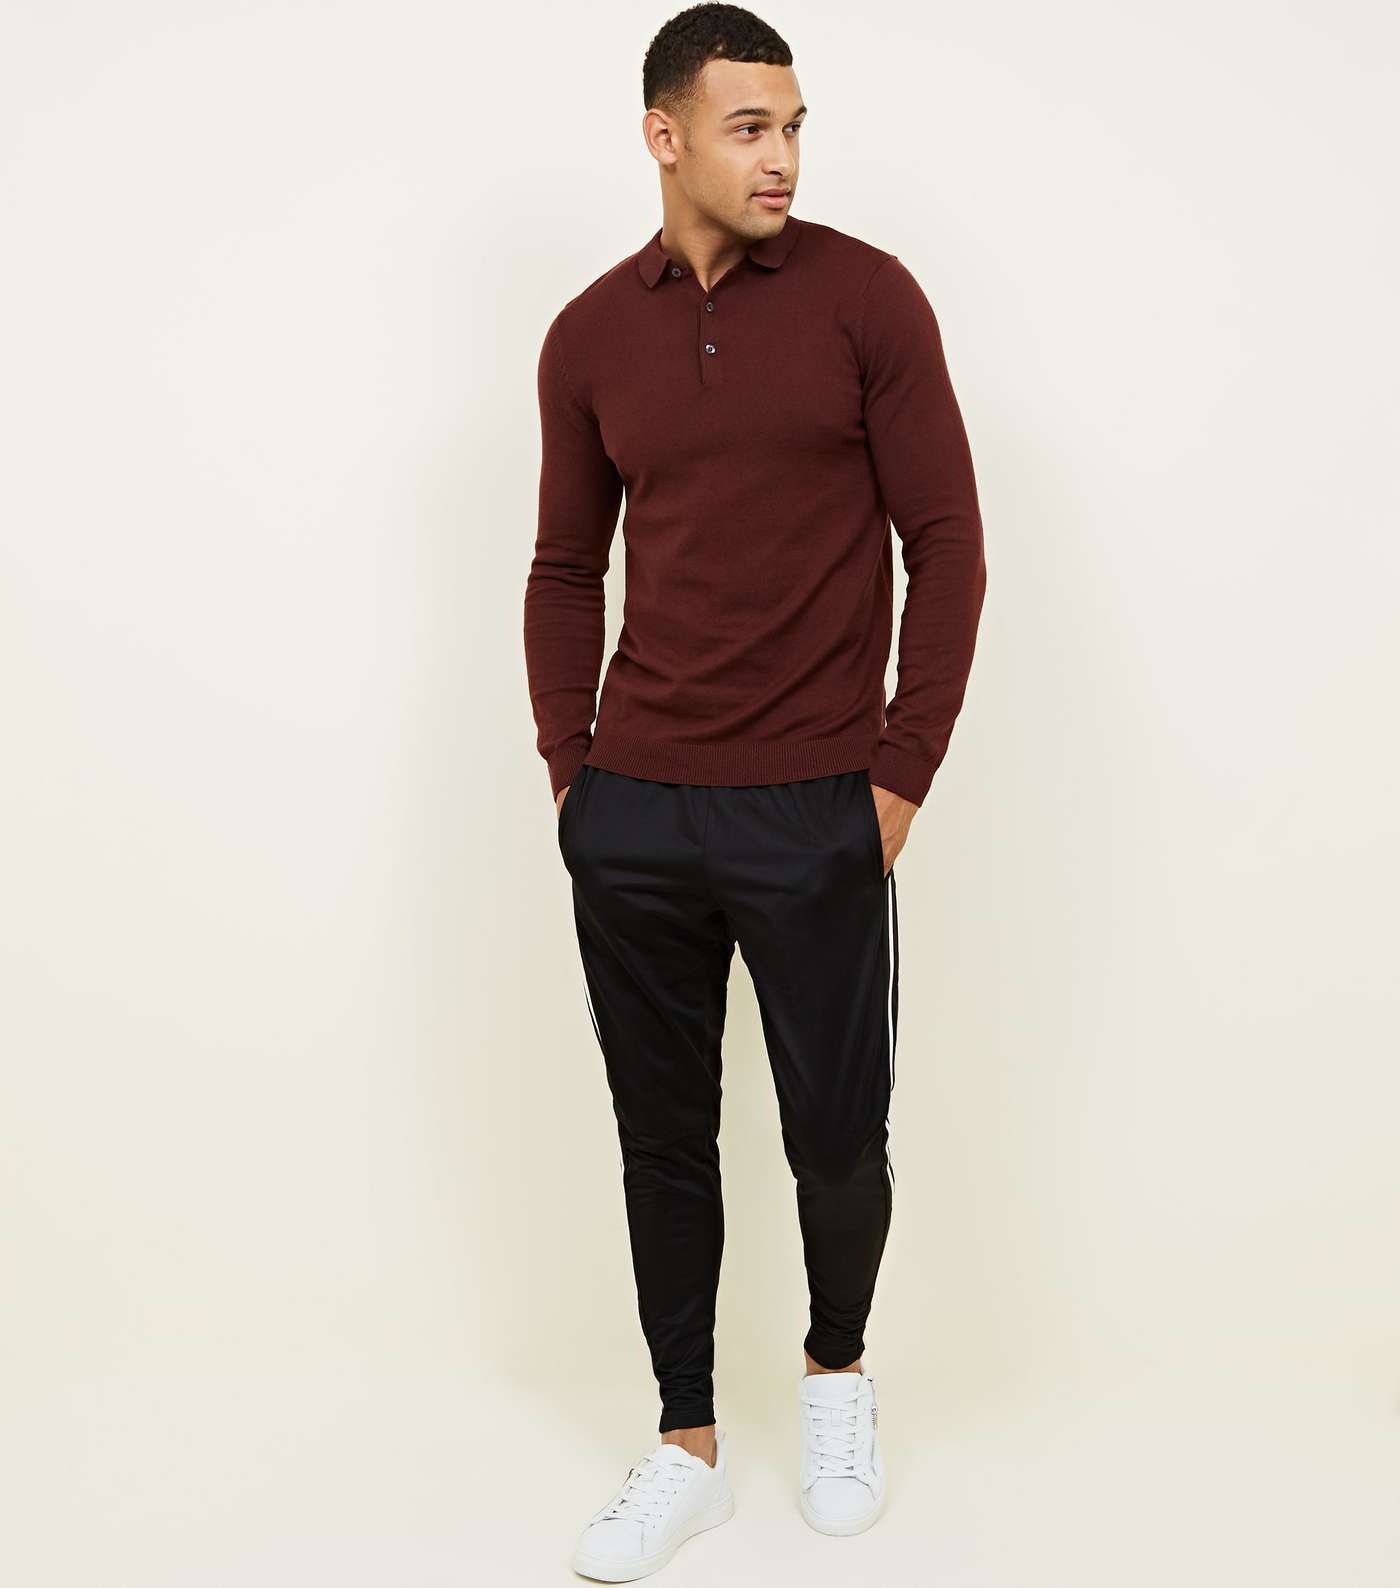 Burgundy Muscle Fit Long Sleeve Knit Polo Shirt Image 2